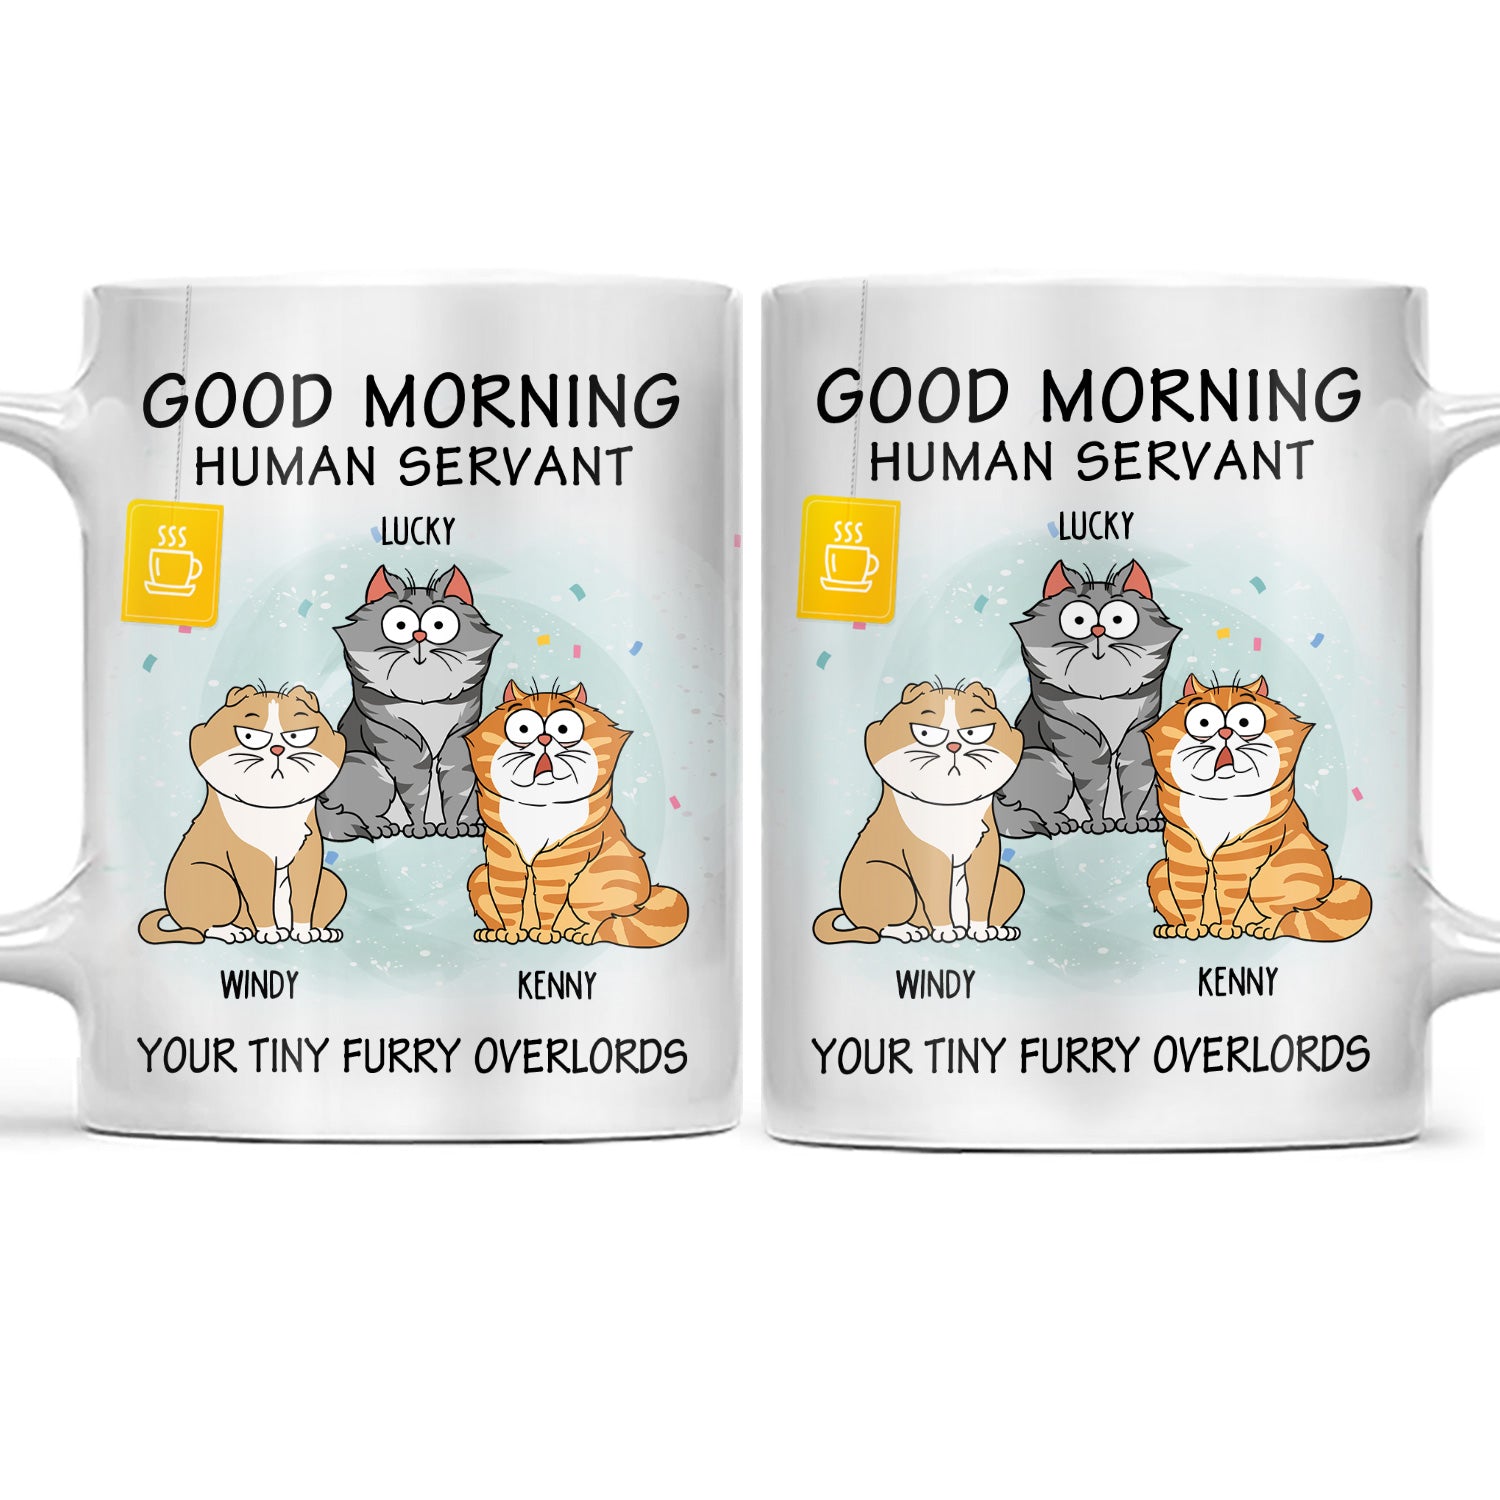 Good Morning Human Servant Tiny Furry Overlords - Gift For Cat Lovers - Personalized White Edge To Edge Mug